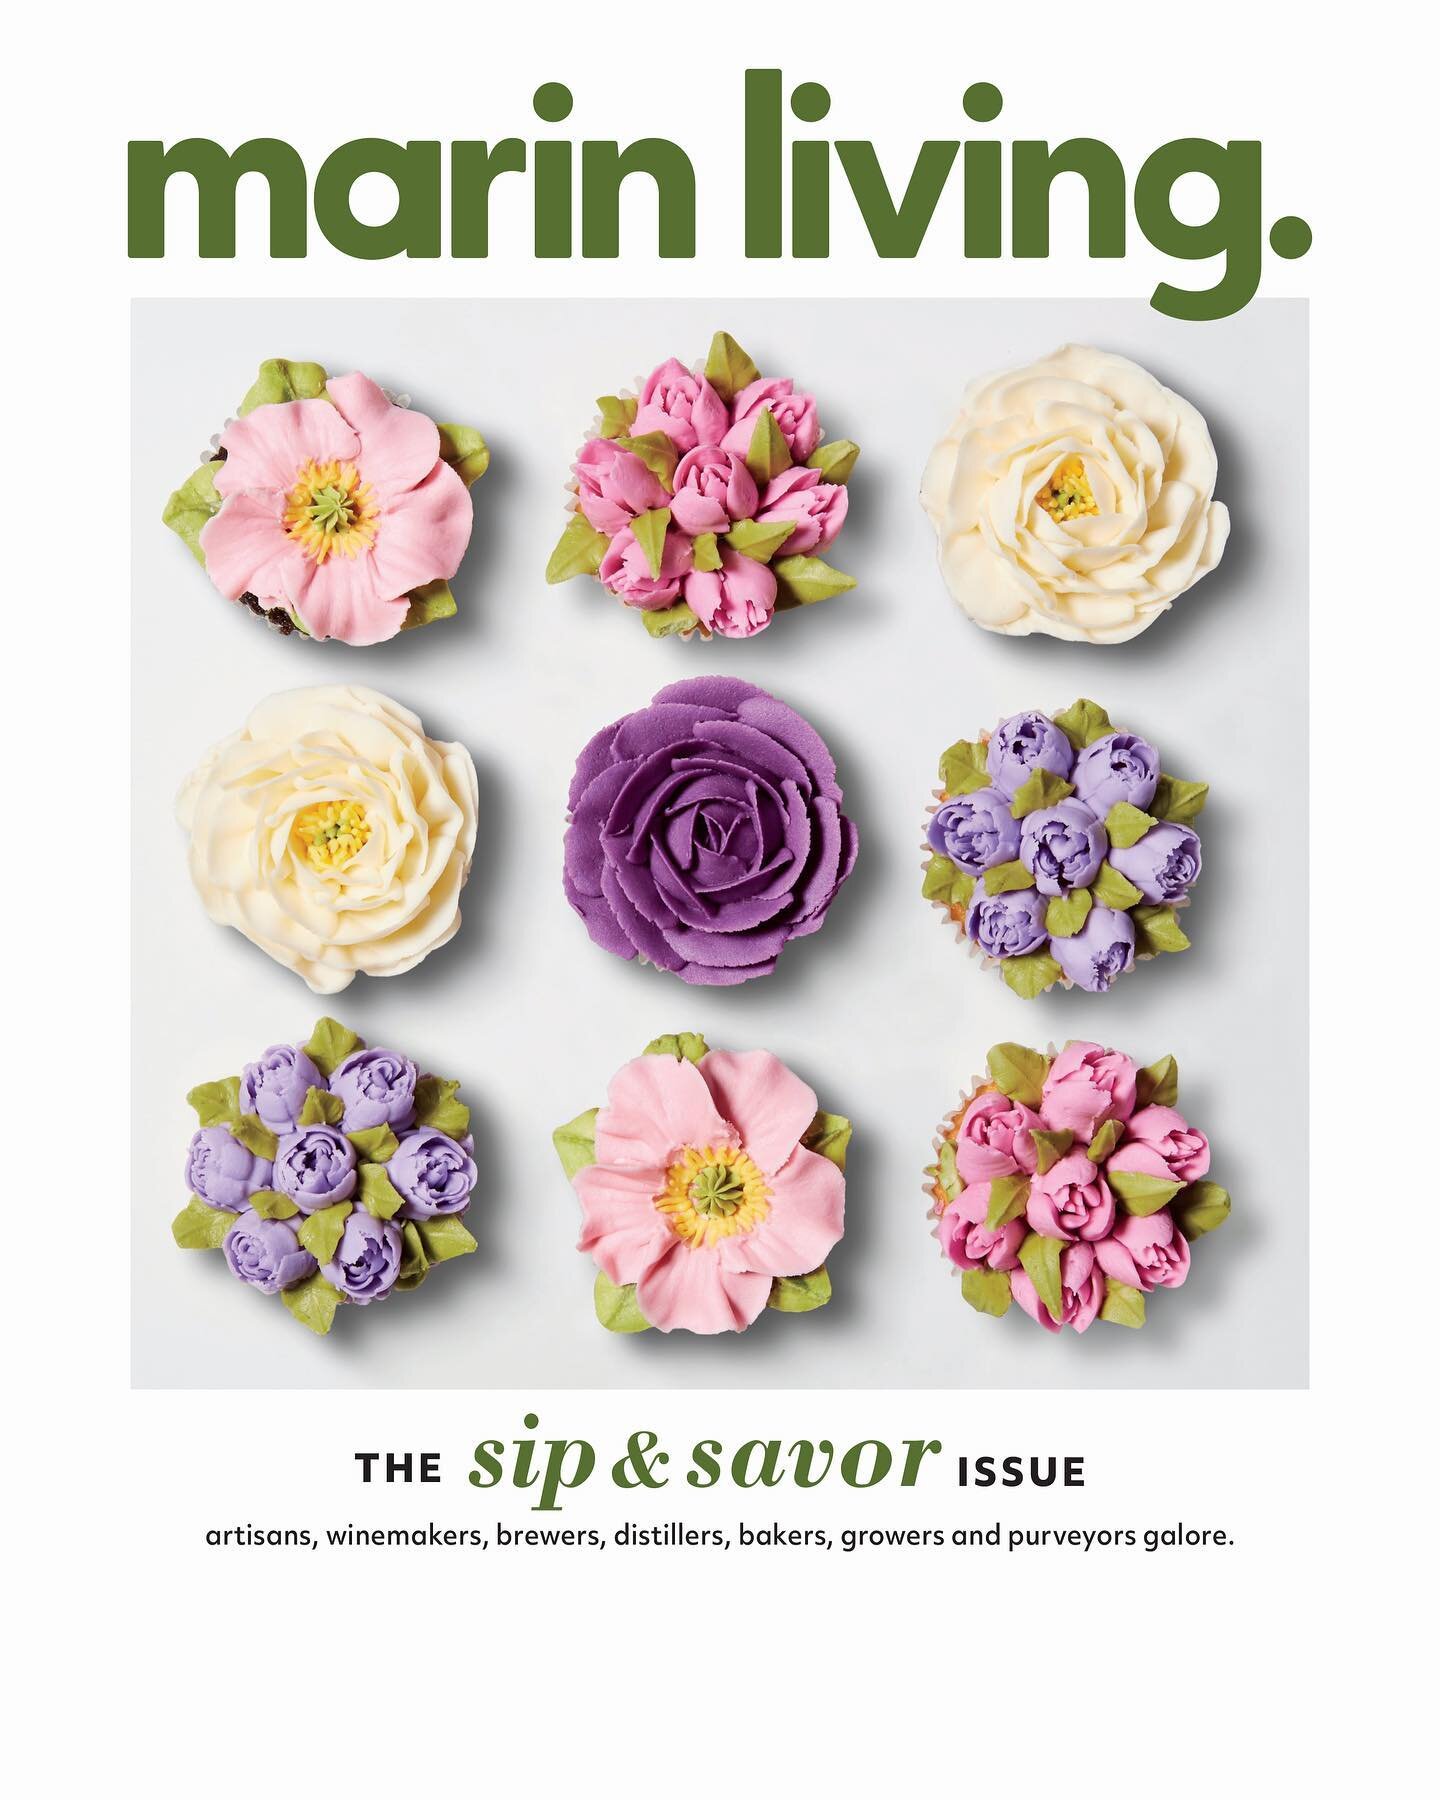 Honored to shoot the beautiful cupcakes by @bakedblooms for the cover of @marinlivingmag